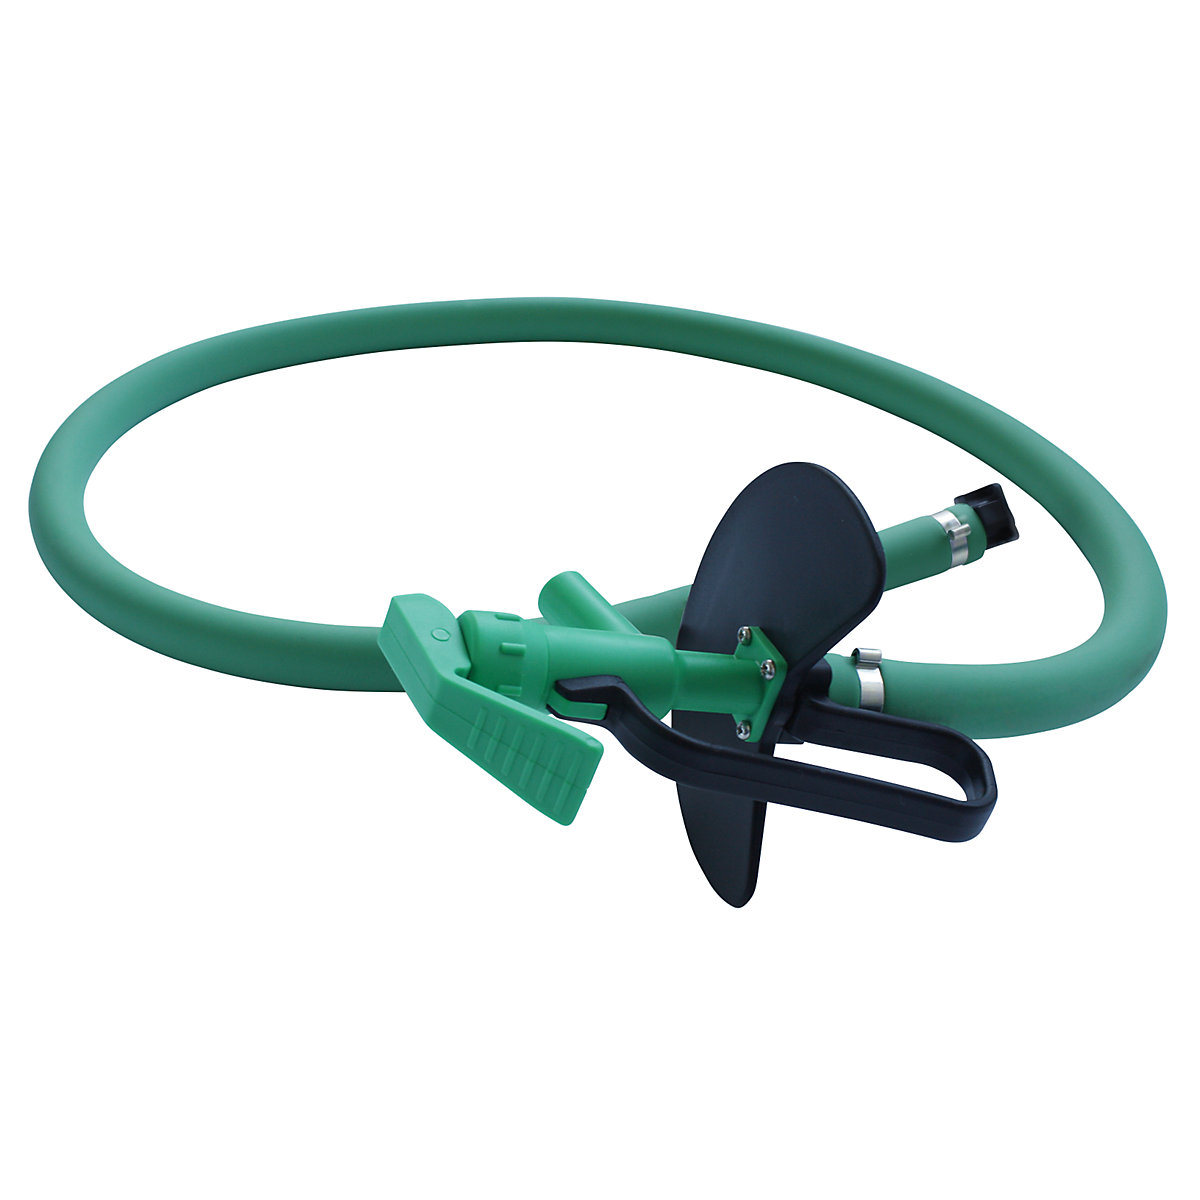 Hand pump discharge hose with tap - Jessberger